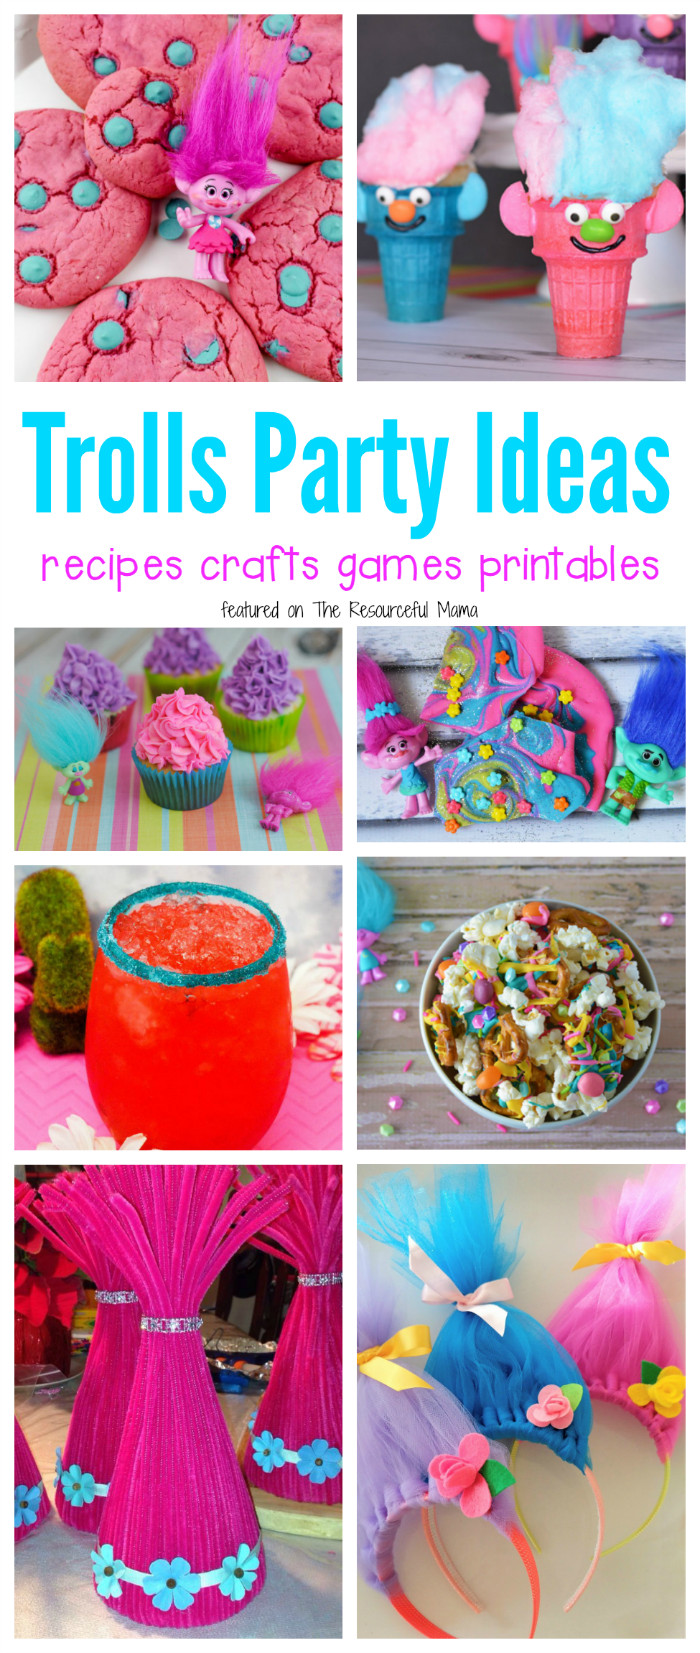 Troll Food Ideas For Party
 Pin on The Resourceful Mama